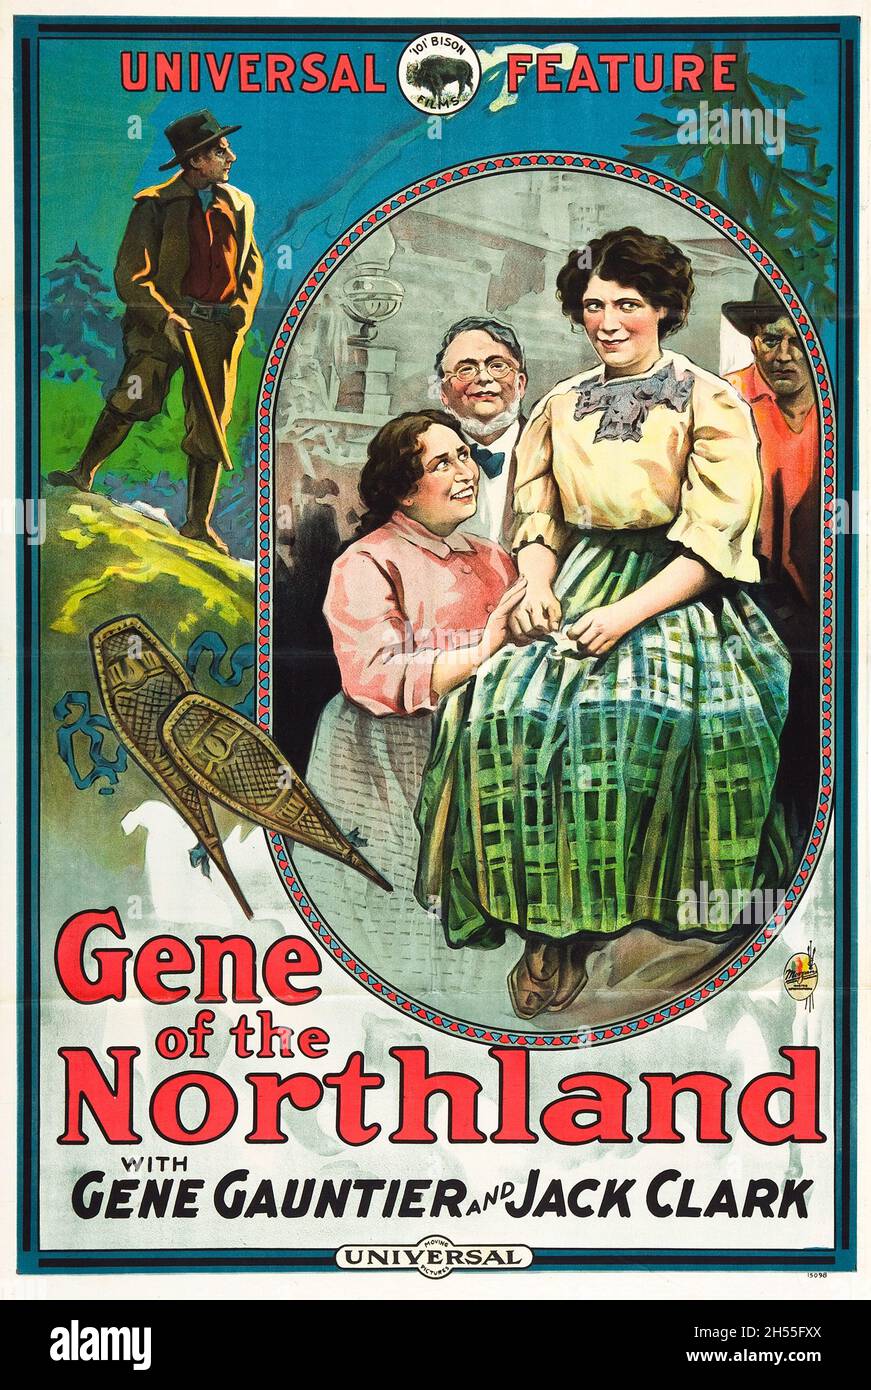 Gene of the Northland (Universal, 1915) - Antique / old movie / film poster. Stock Photo